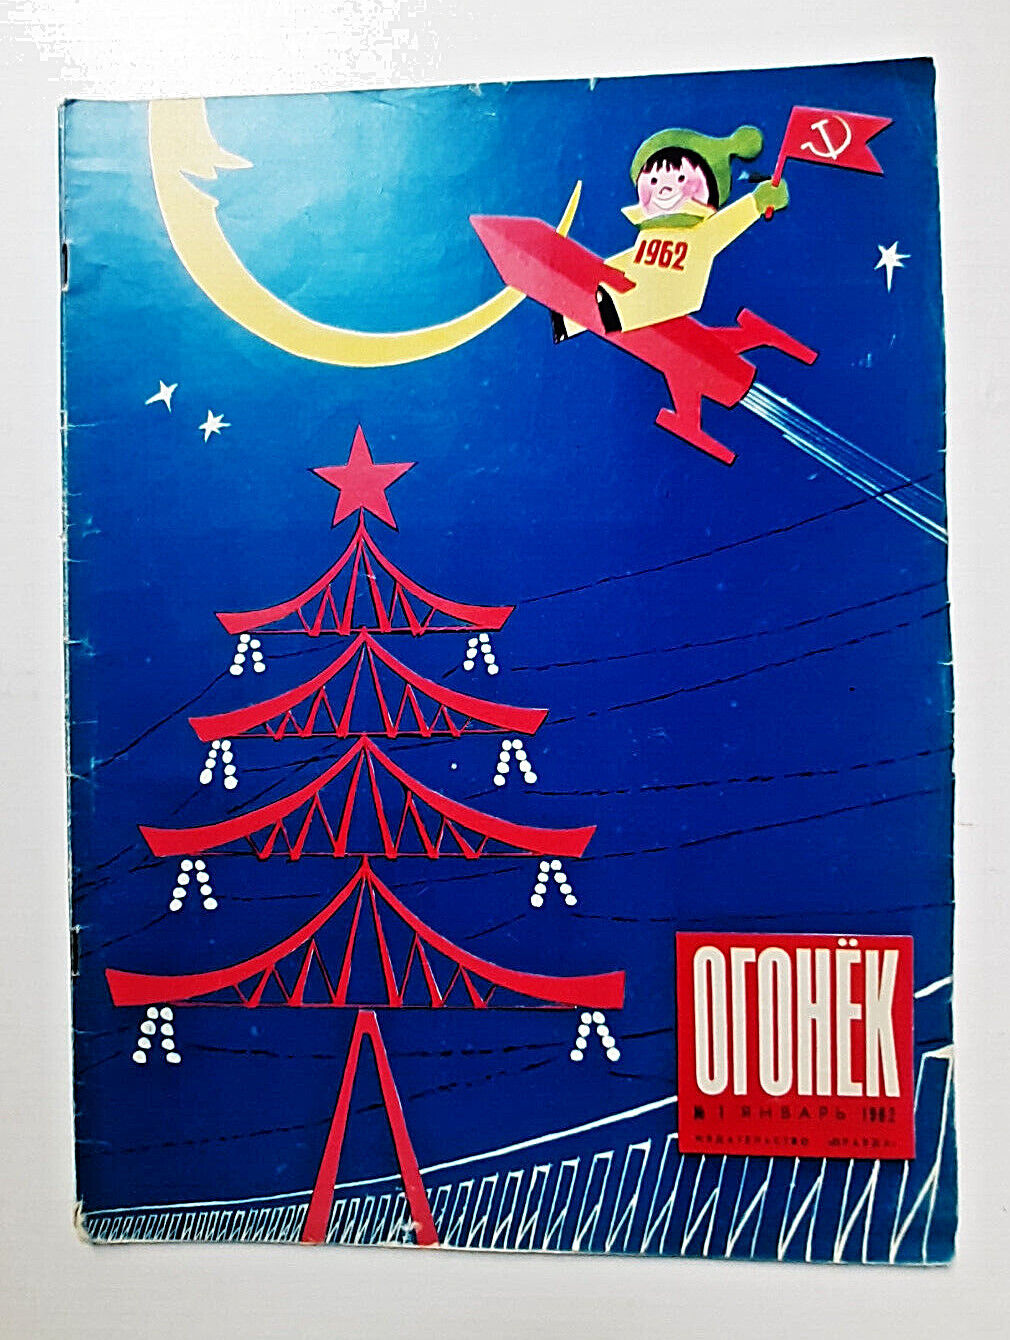 1962 Ogonek #1 Ogoniok One of the oldest weekly illustrated magazines in Russia